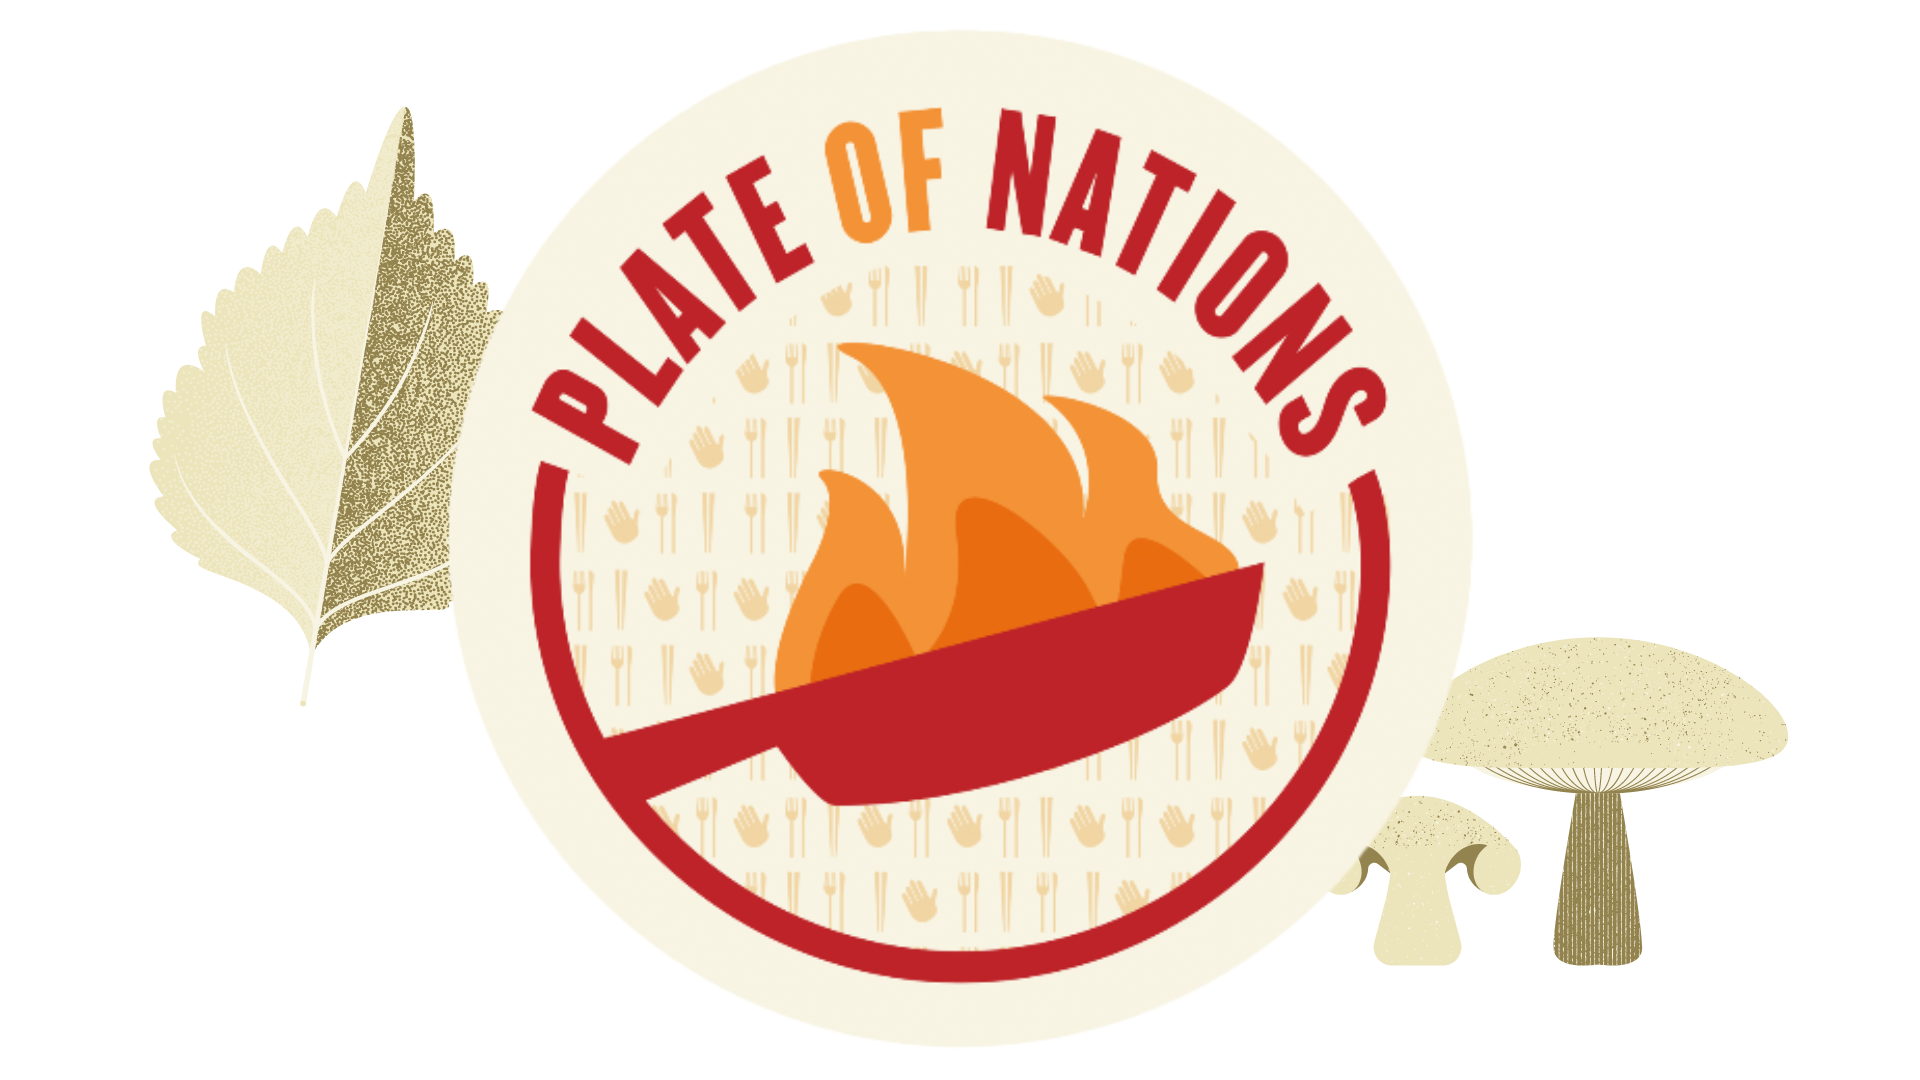 Plate of Nations logo